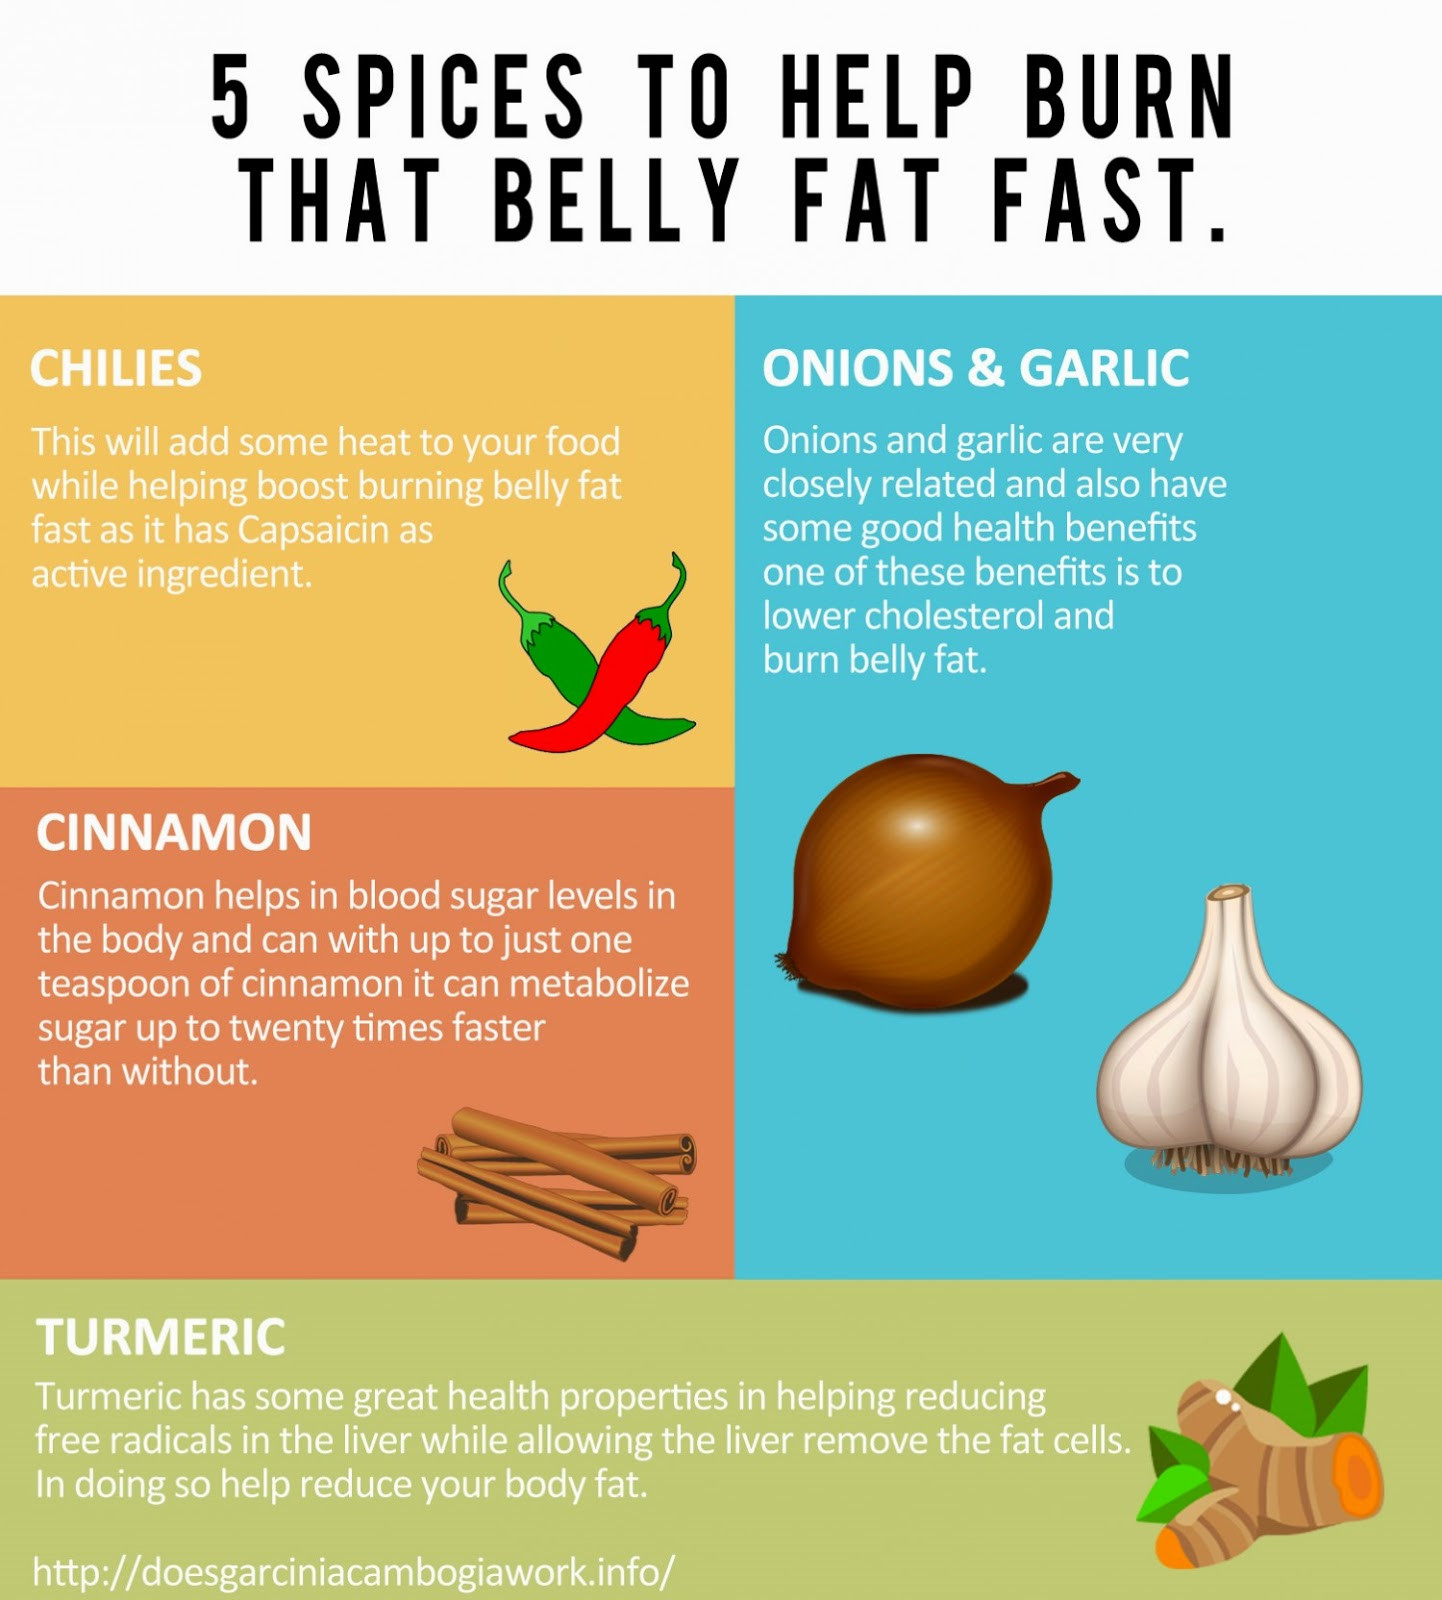 Foods That Help Burn Belly Fat
 3 Recipes and 5 Foods That Help Lose Weight and Burn Belly